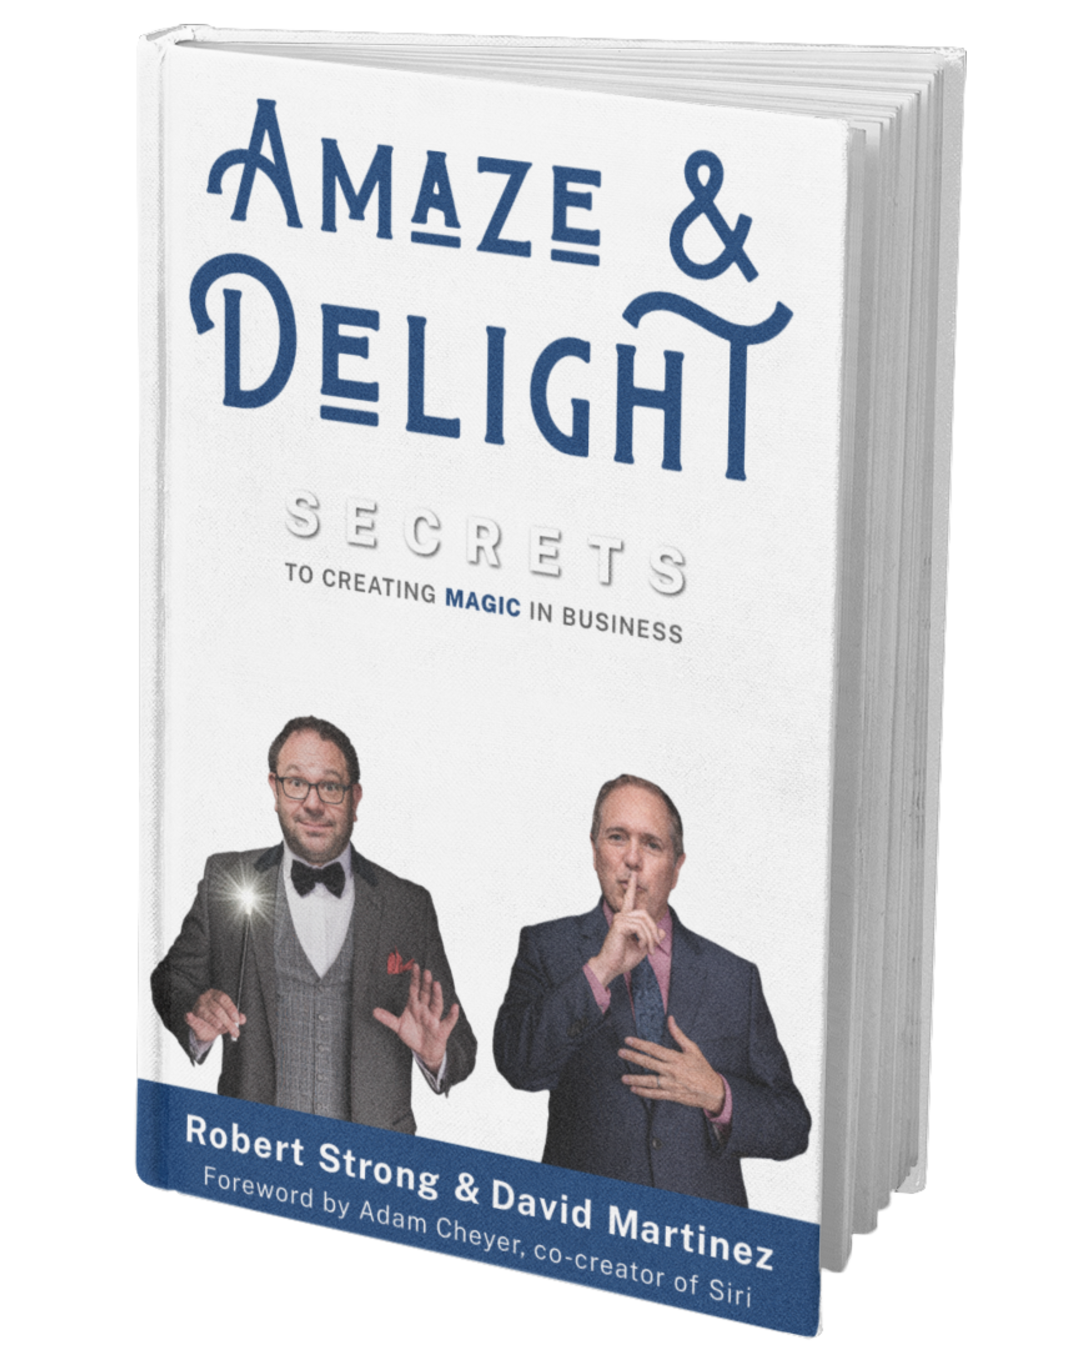 Photo of Amaze & Delight: Secrets to Creating Magic in Business by Robert Strong and David Martinez